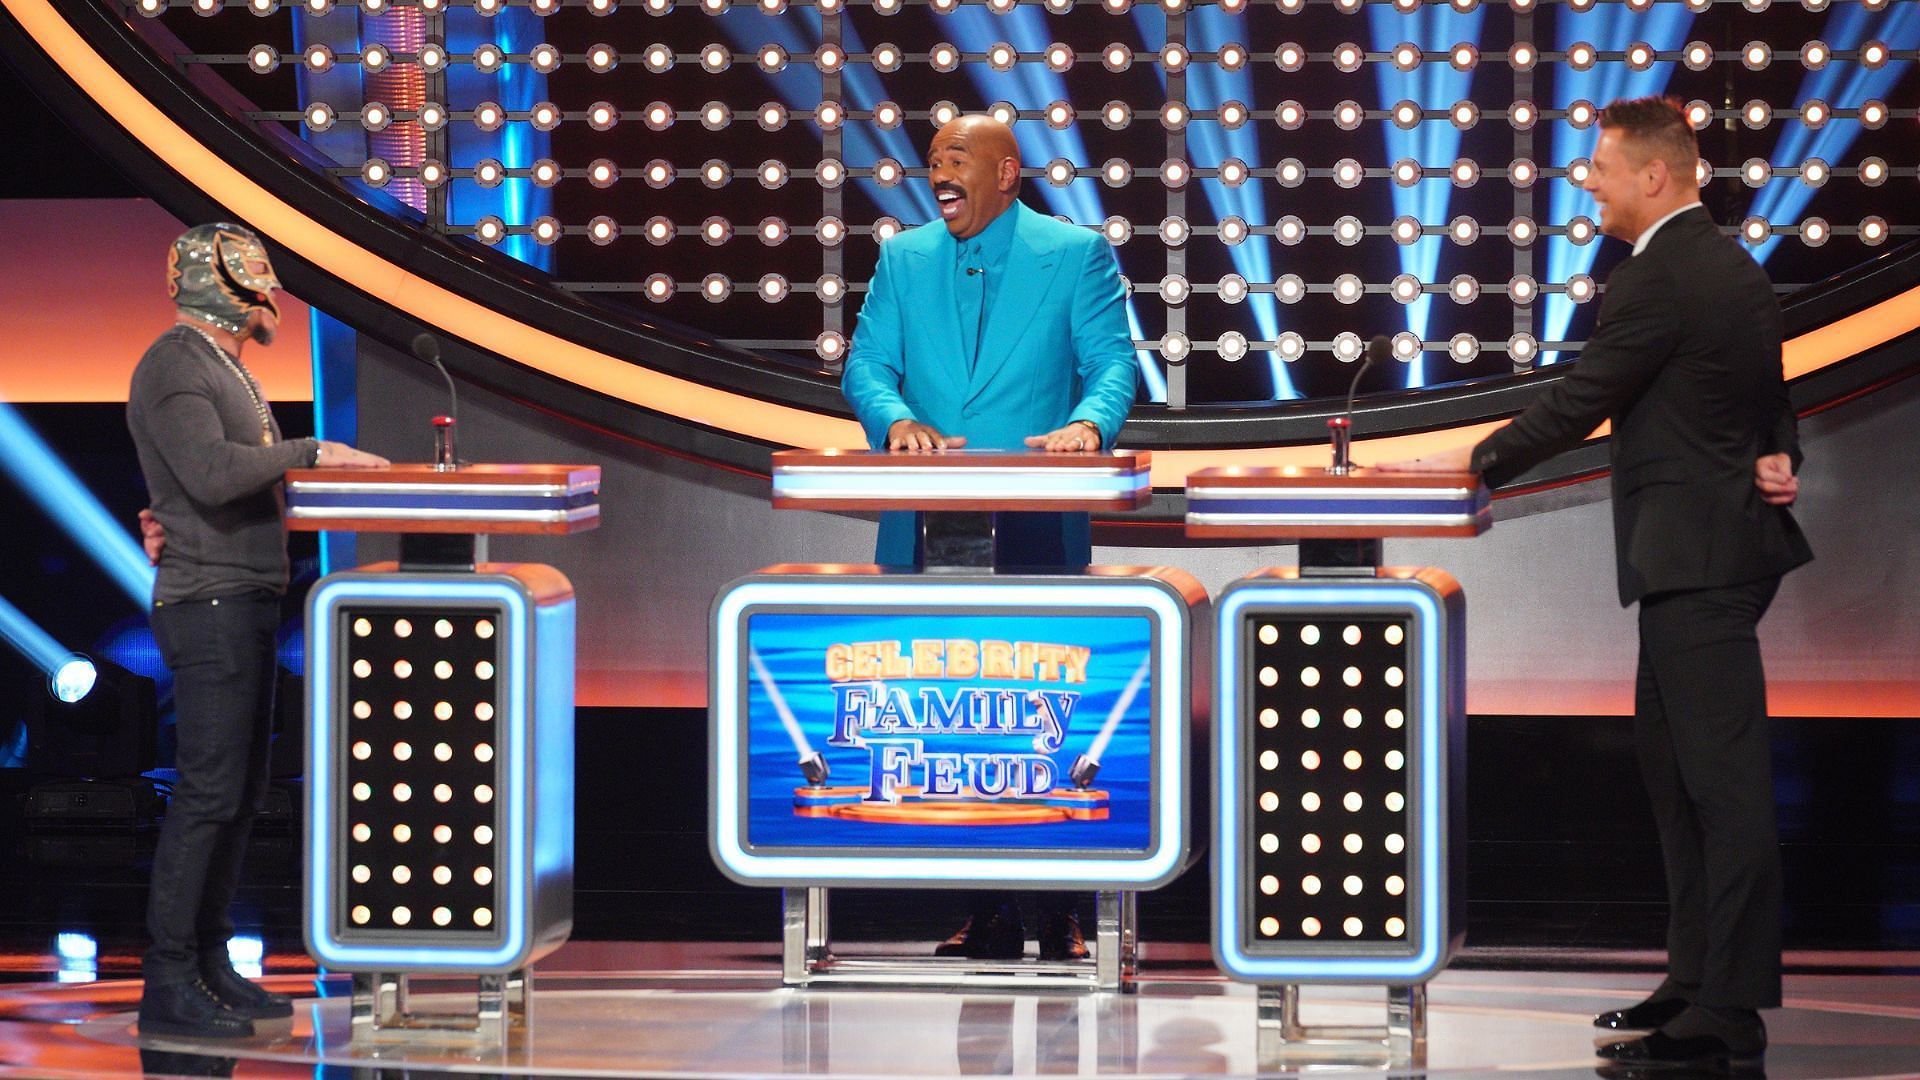 Celebrity Family Feud to feature WWE wresters Rey Mysterio and The Miz